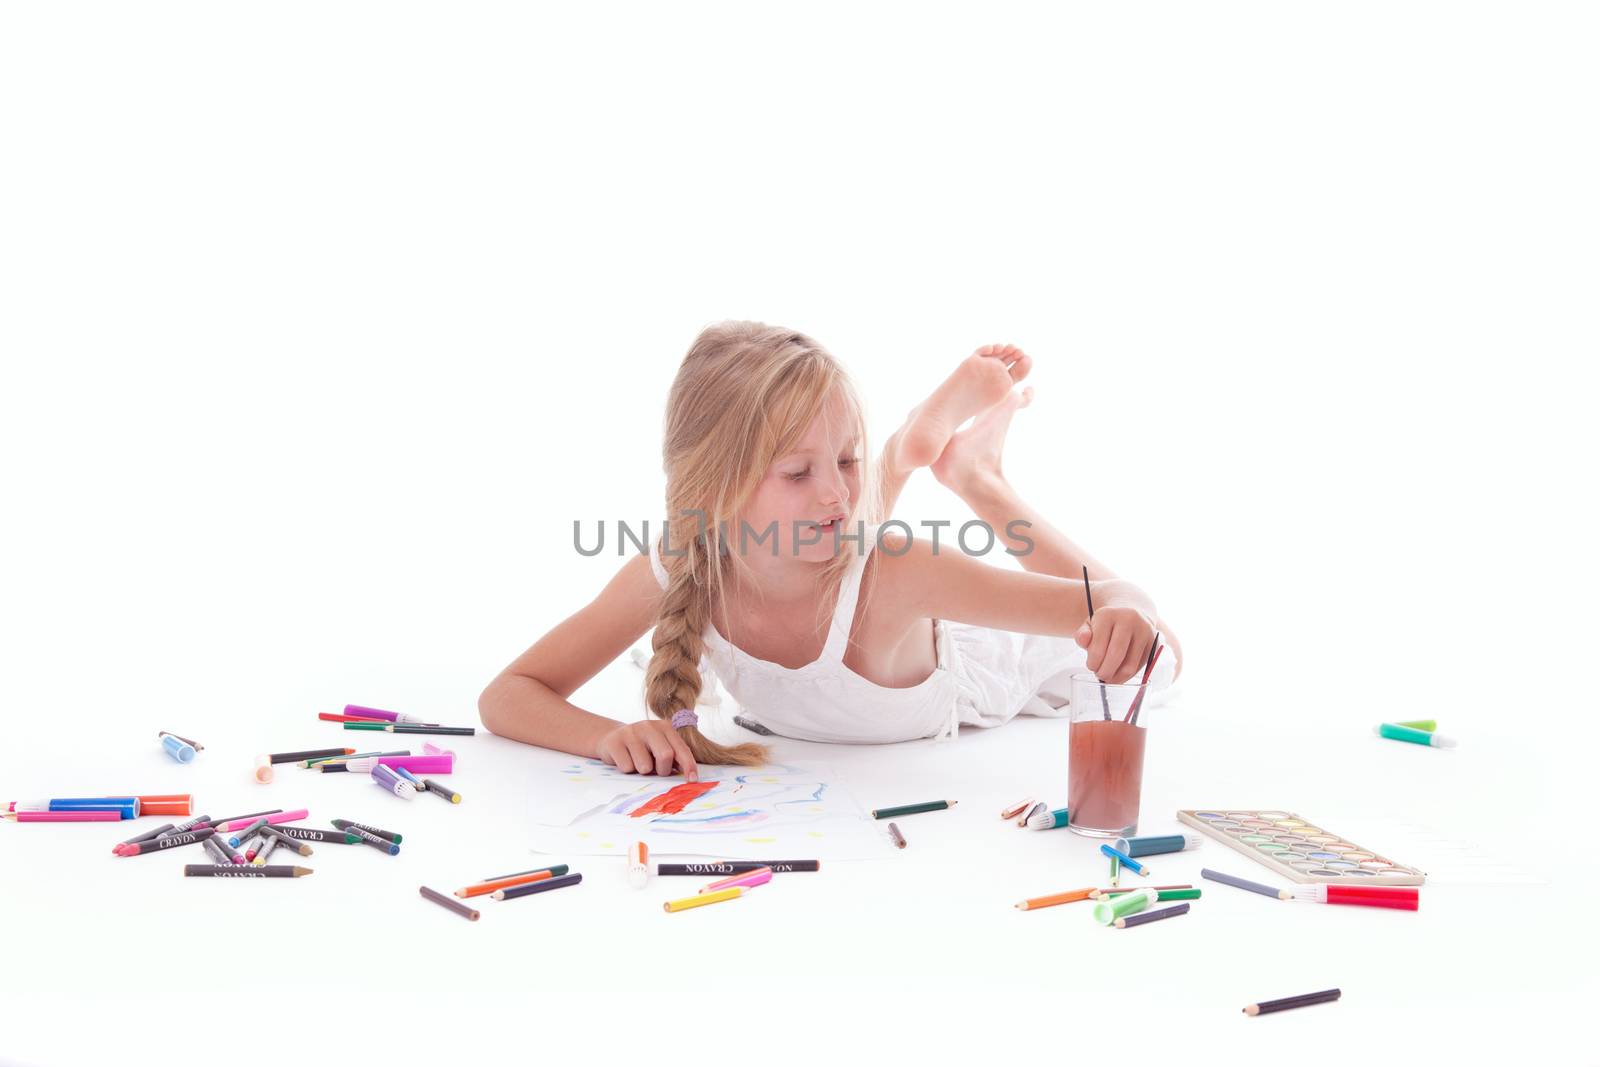 young girl painting with watercolor on floor of studio against white background